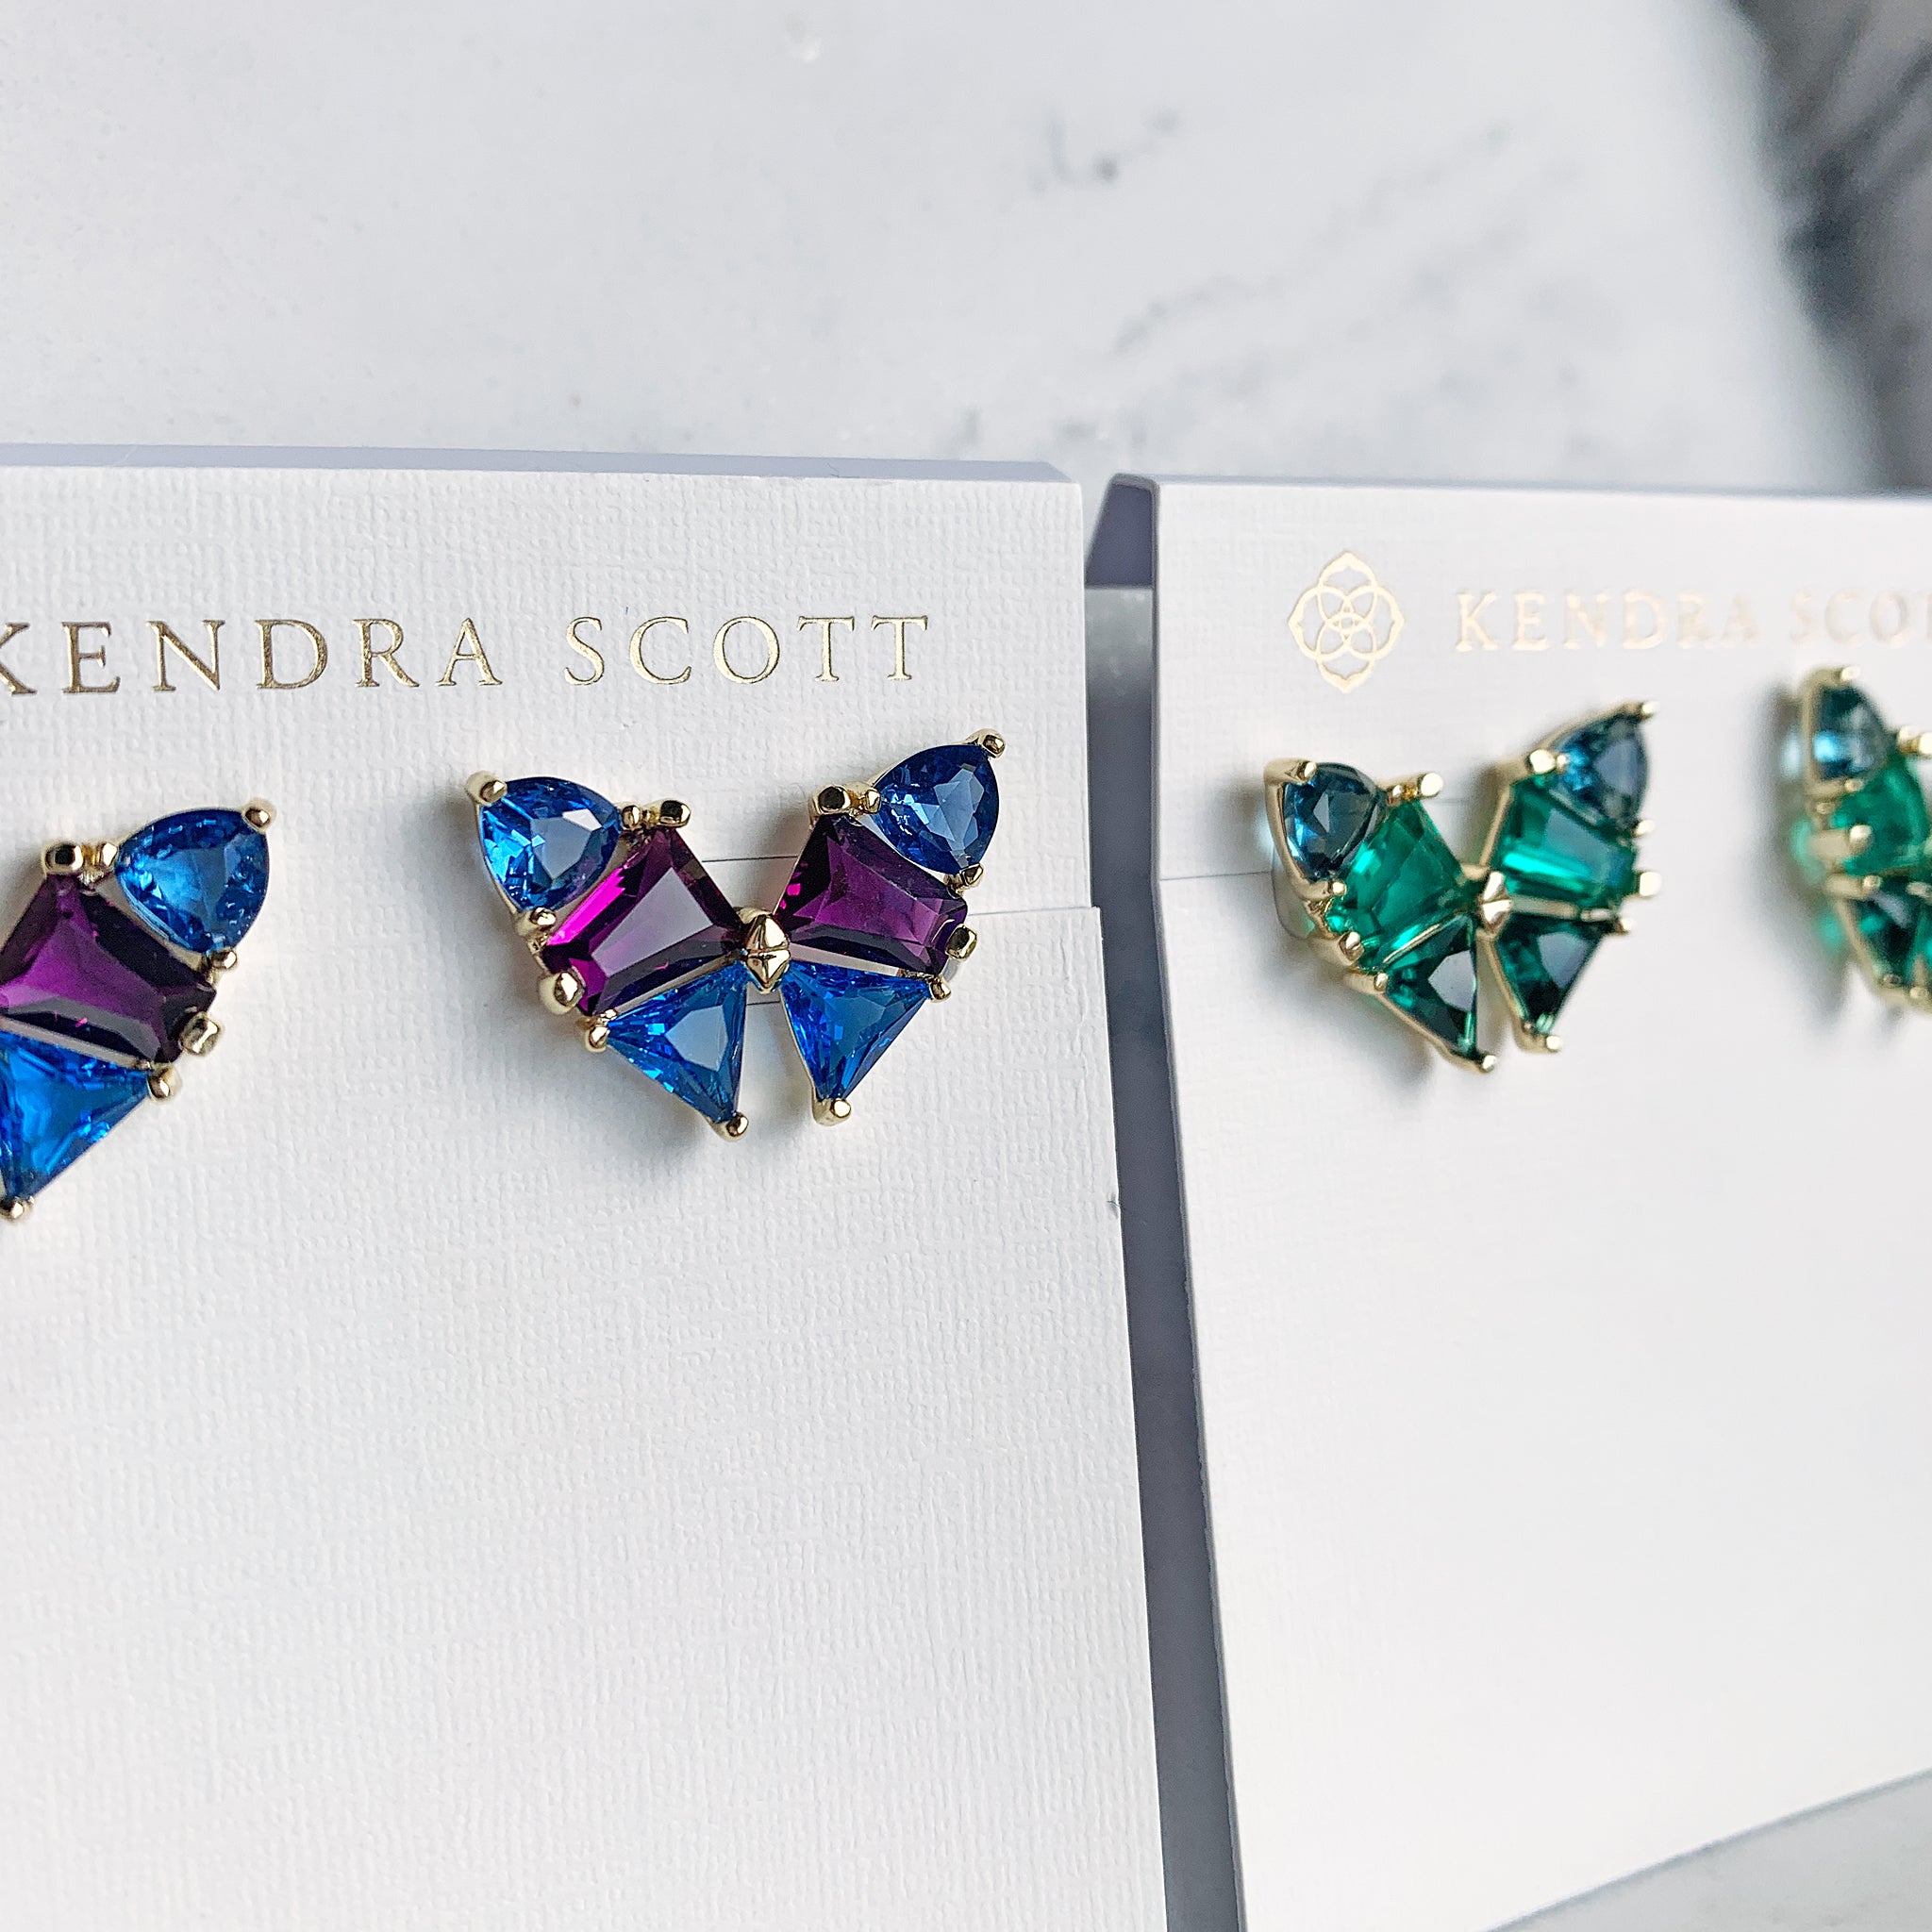 Kendra Scott Blair Butterfly Stud Earrings in Blue Mix and Gold Plated